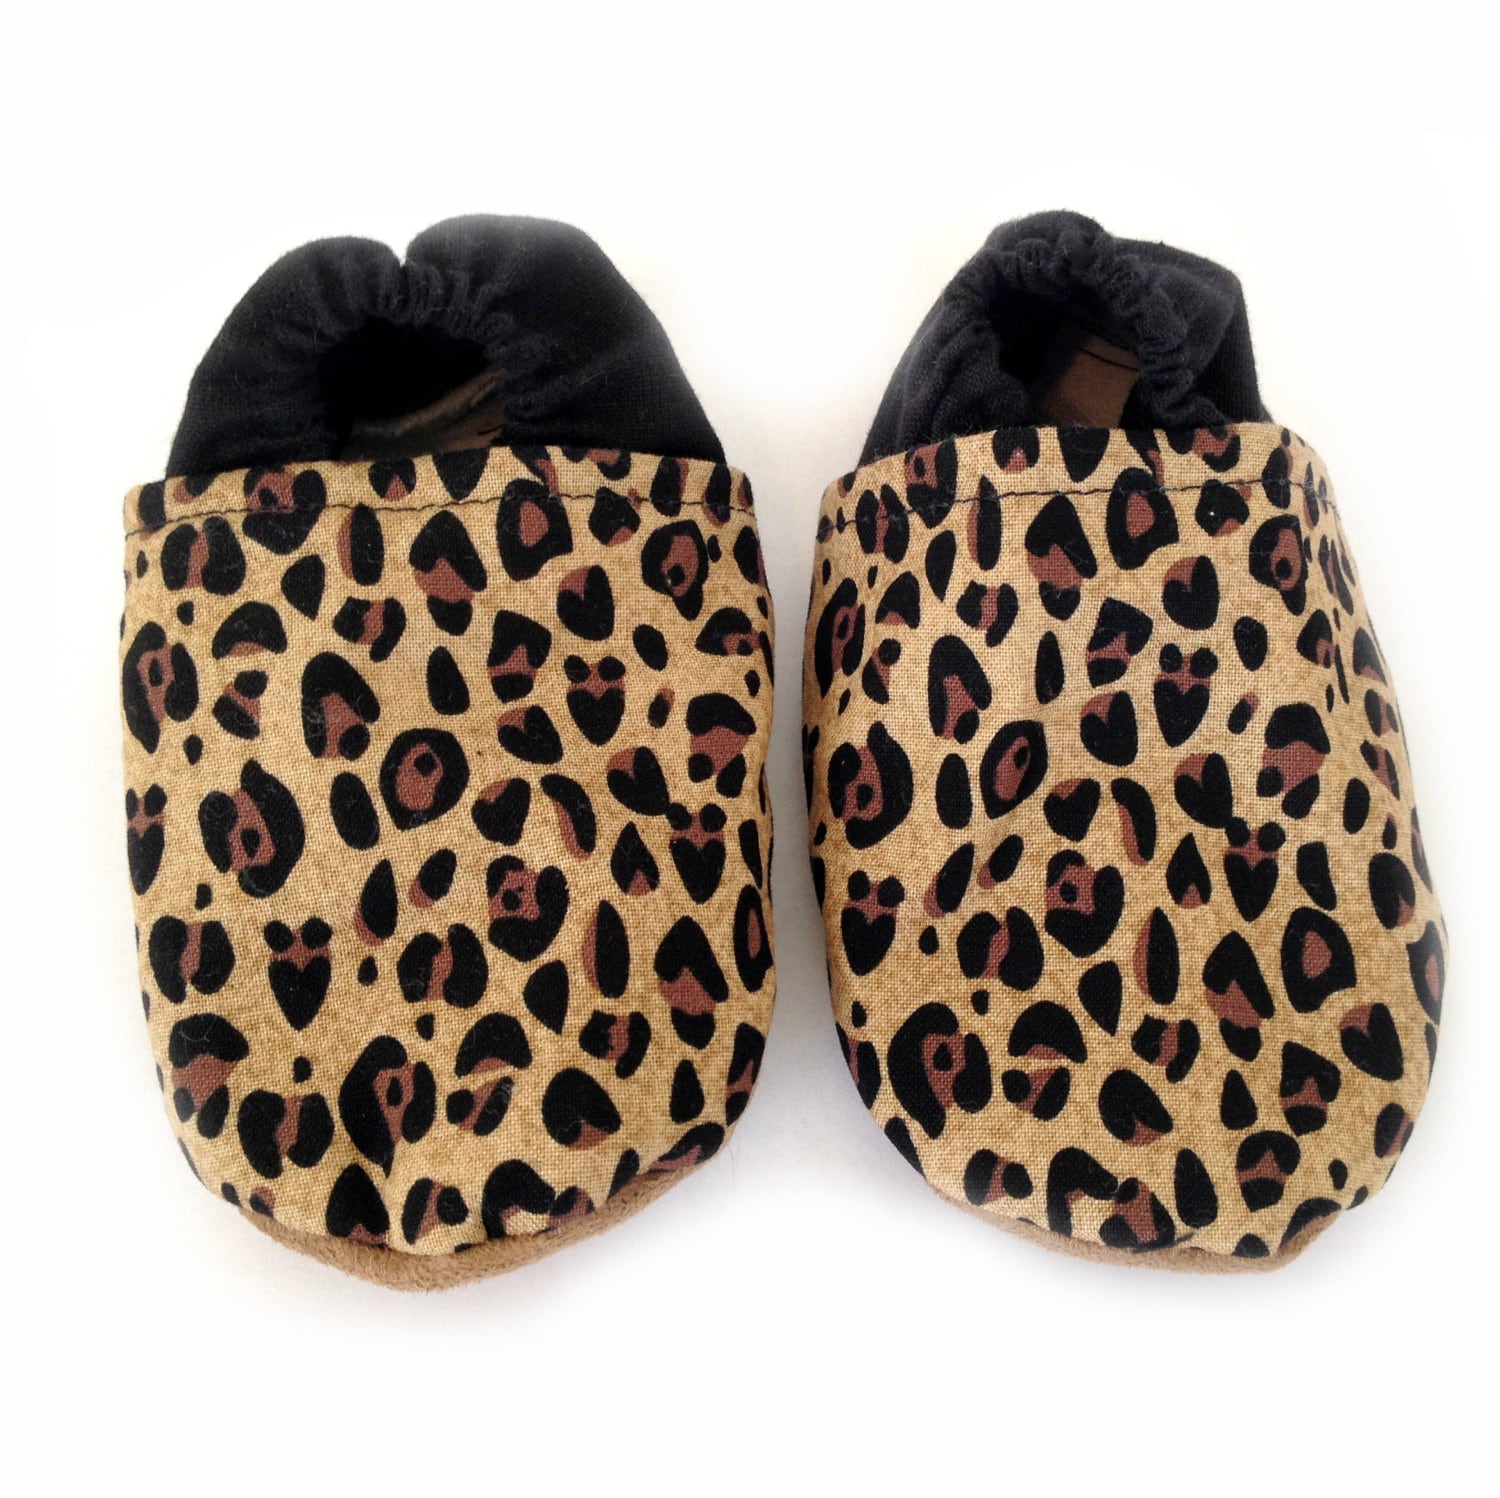 Leopard print and black baby shoes leopard print baby